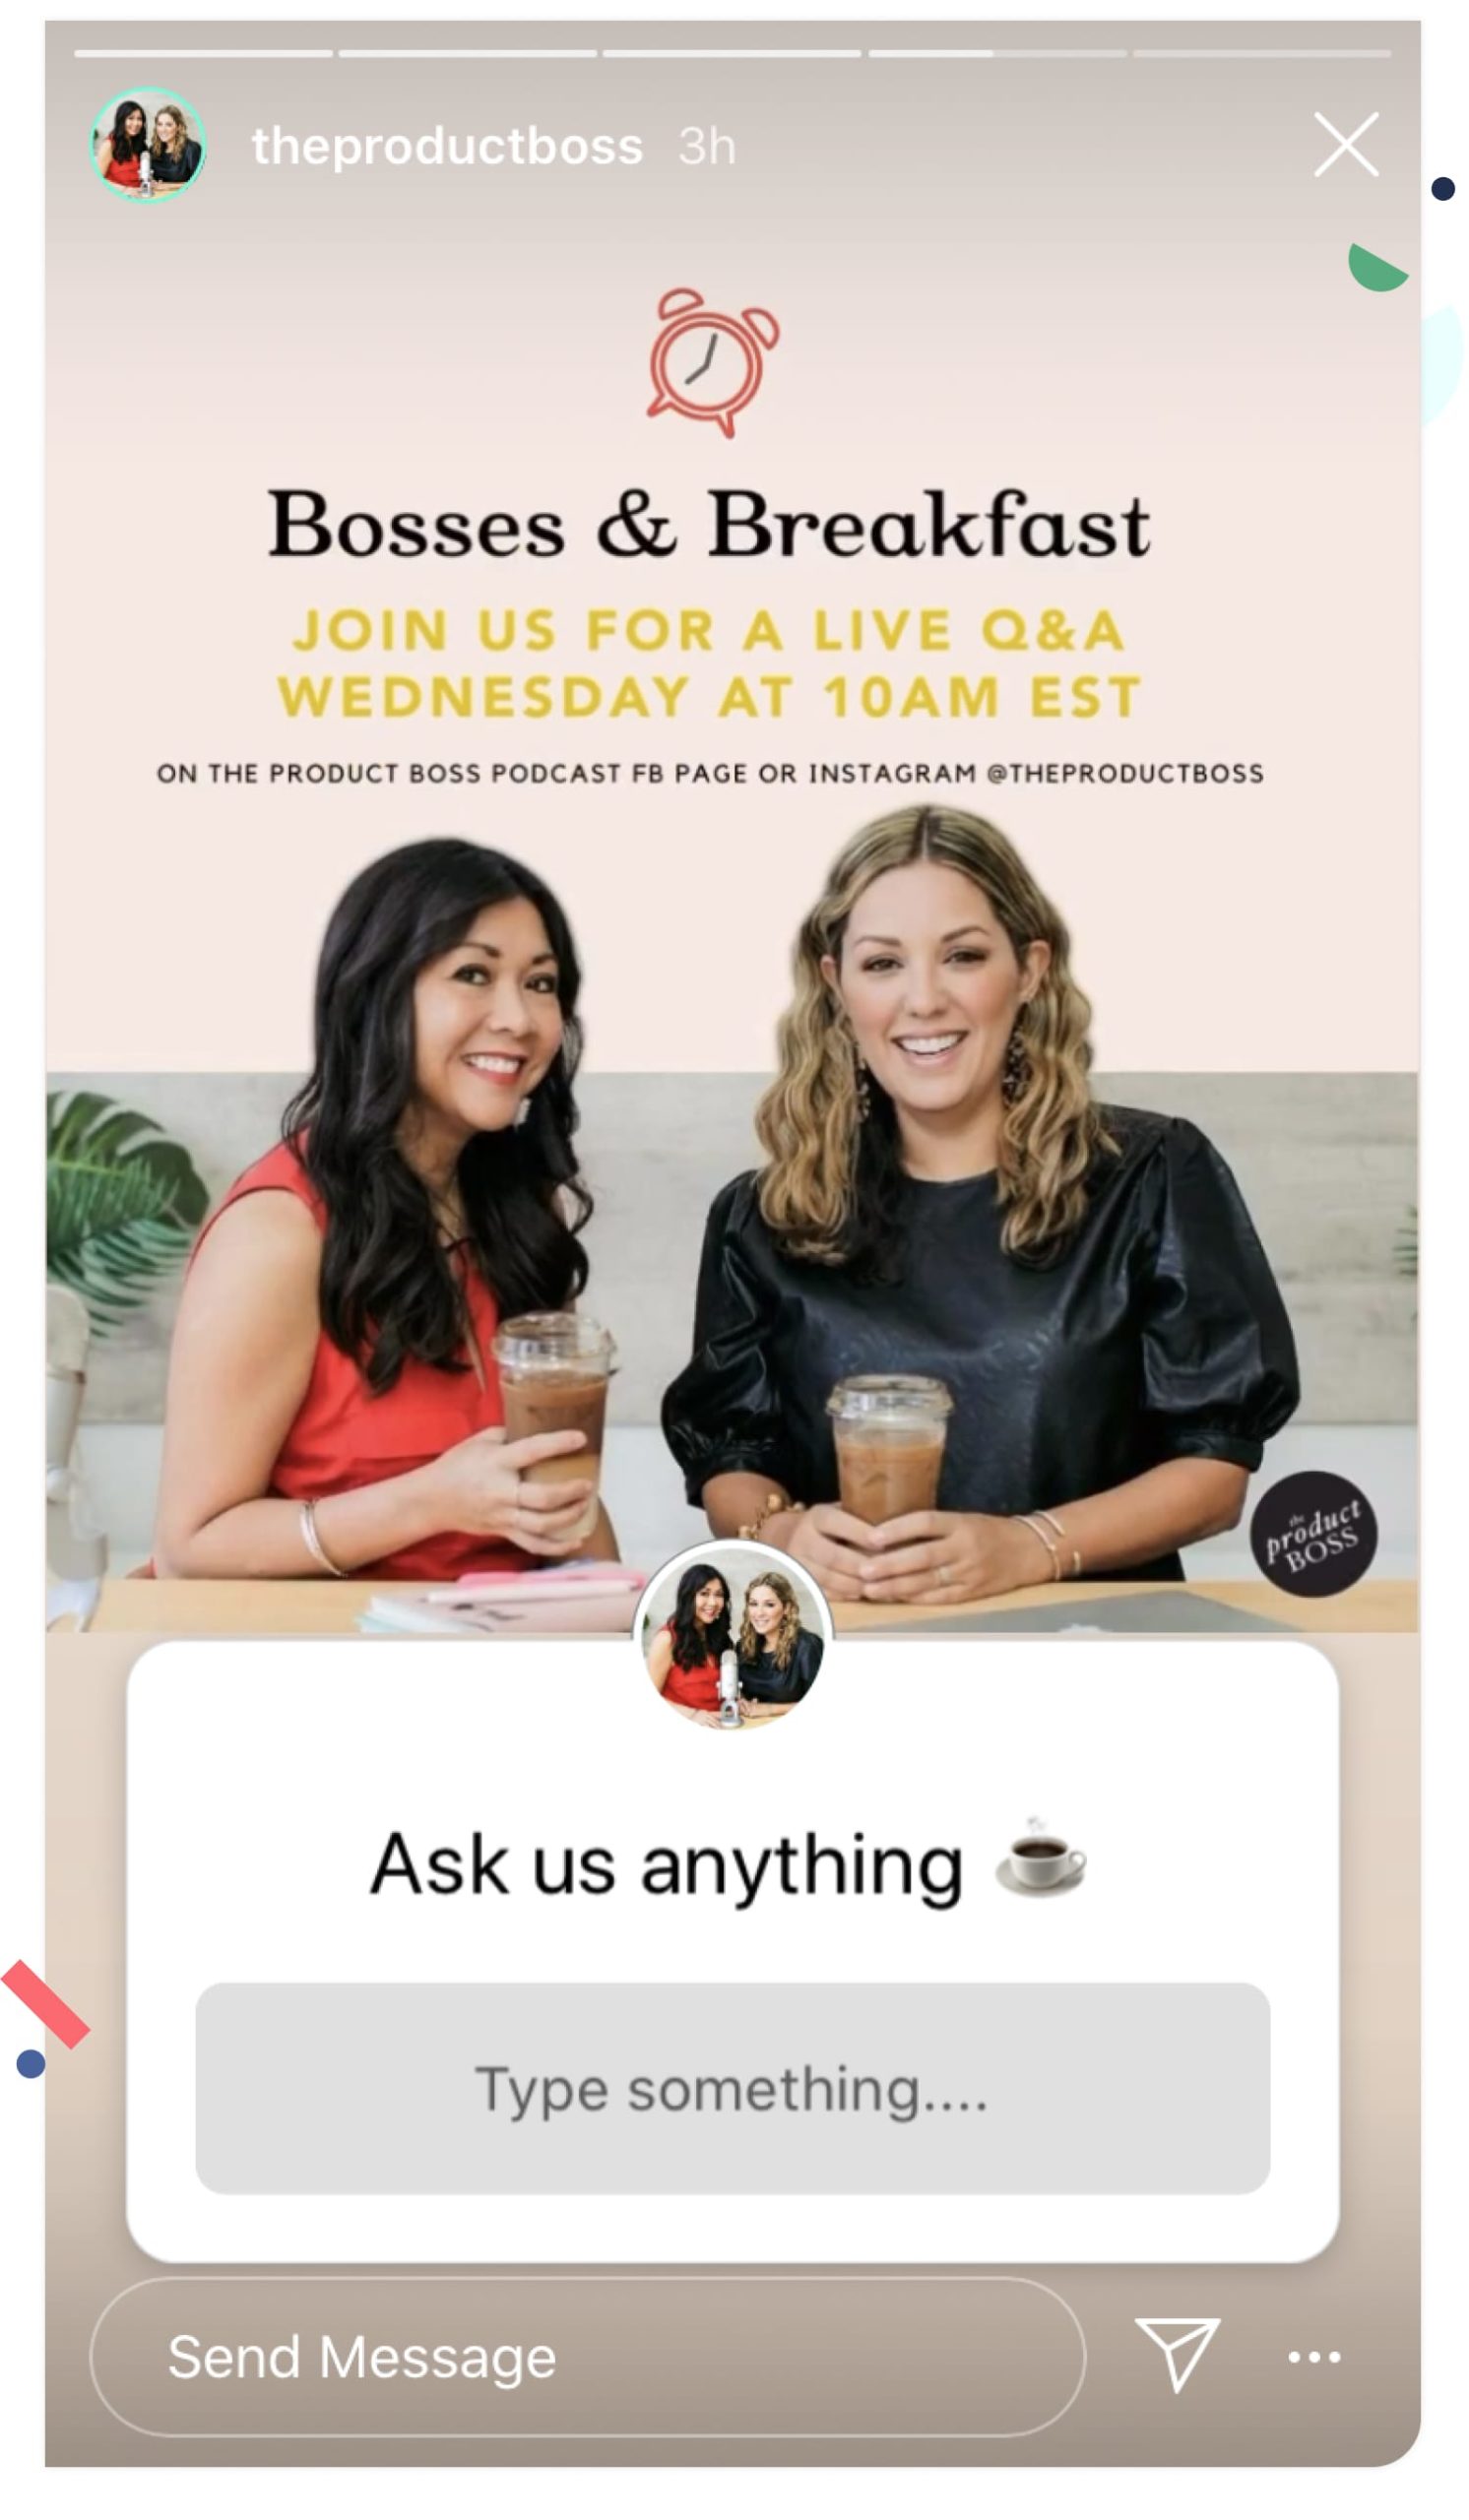 Coaching company The Product Boss uses Question Stickers in Stories to gather content for their live Q & A session with their audience. Image via @theproductboss.